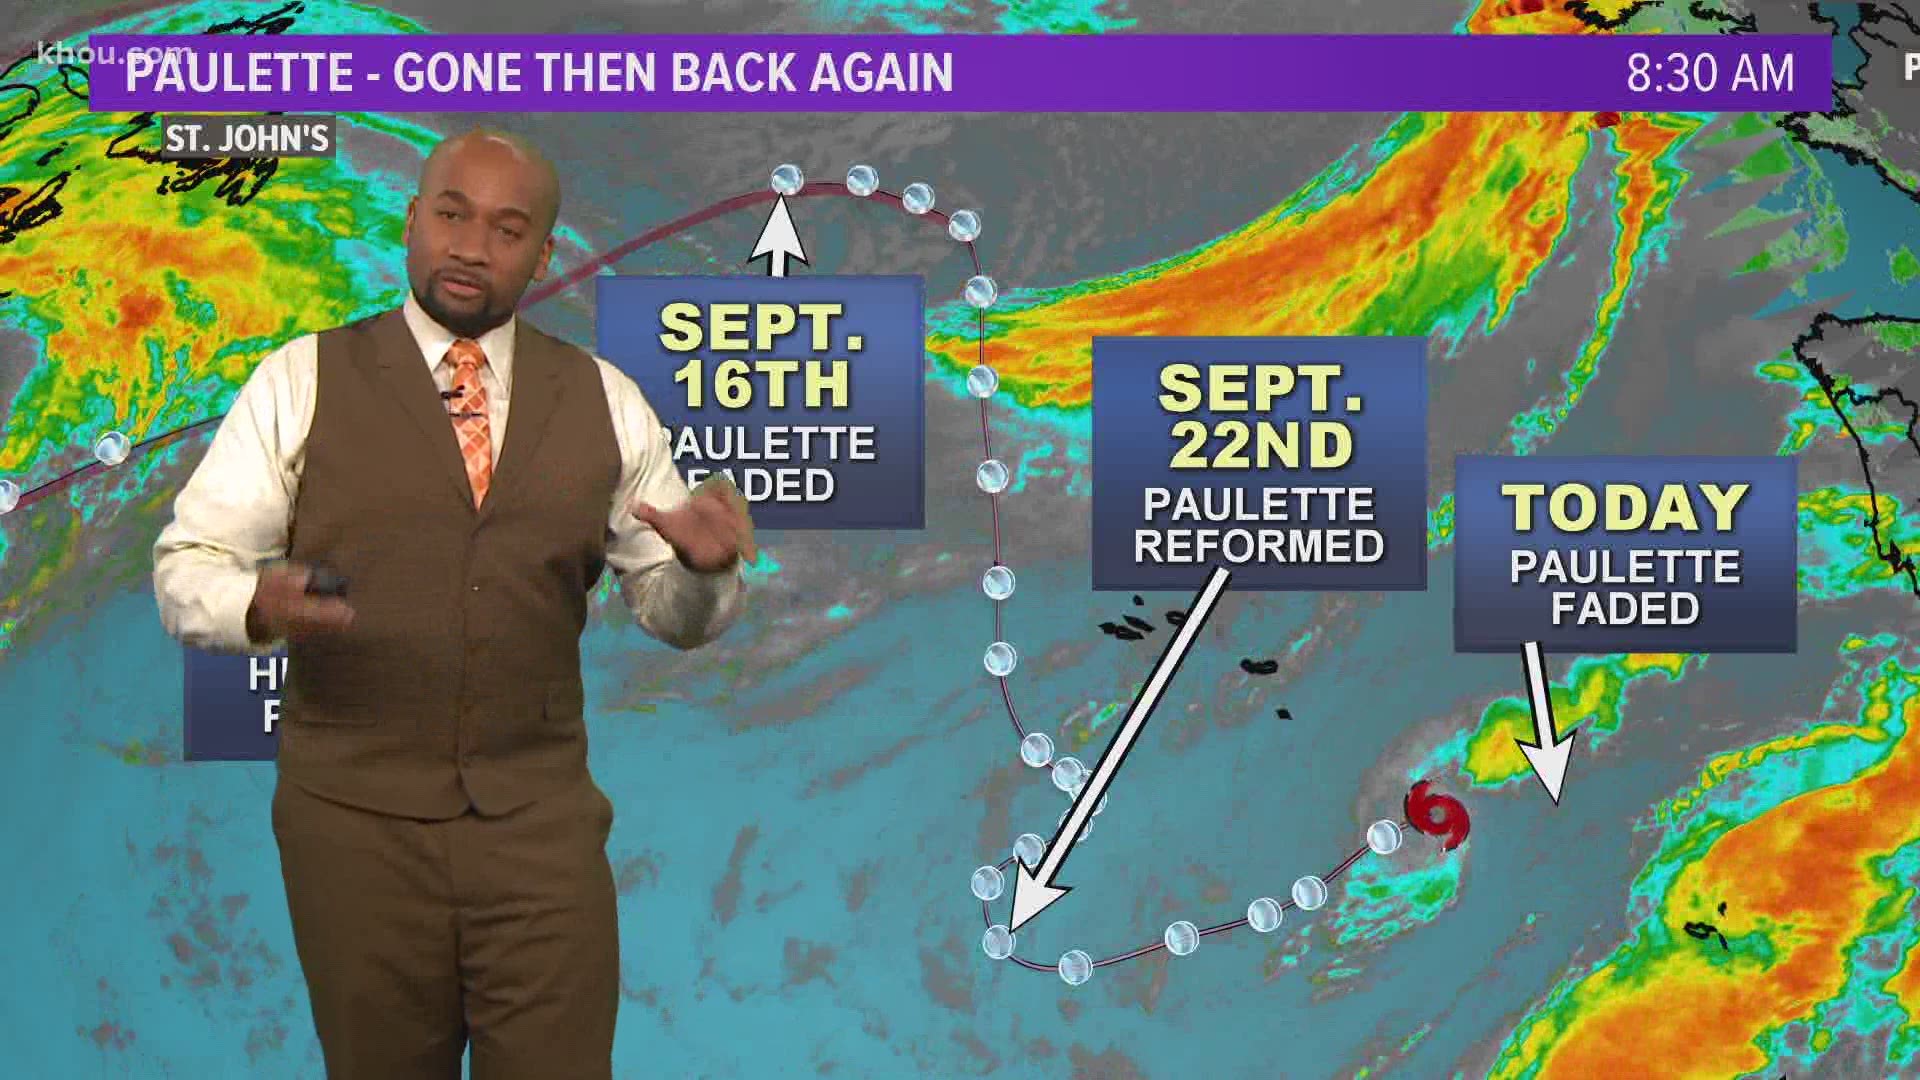 More than a week after hitting Bermuda as a hurricane, Paulette has come back to life as a "zombie tropical storm." Seriously.